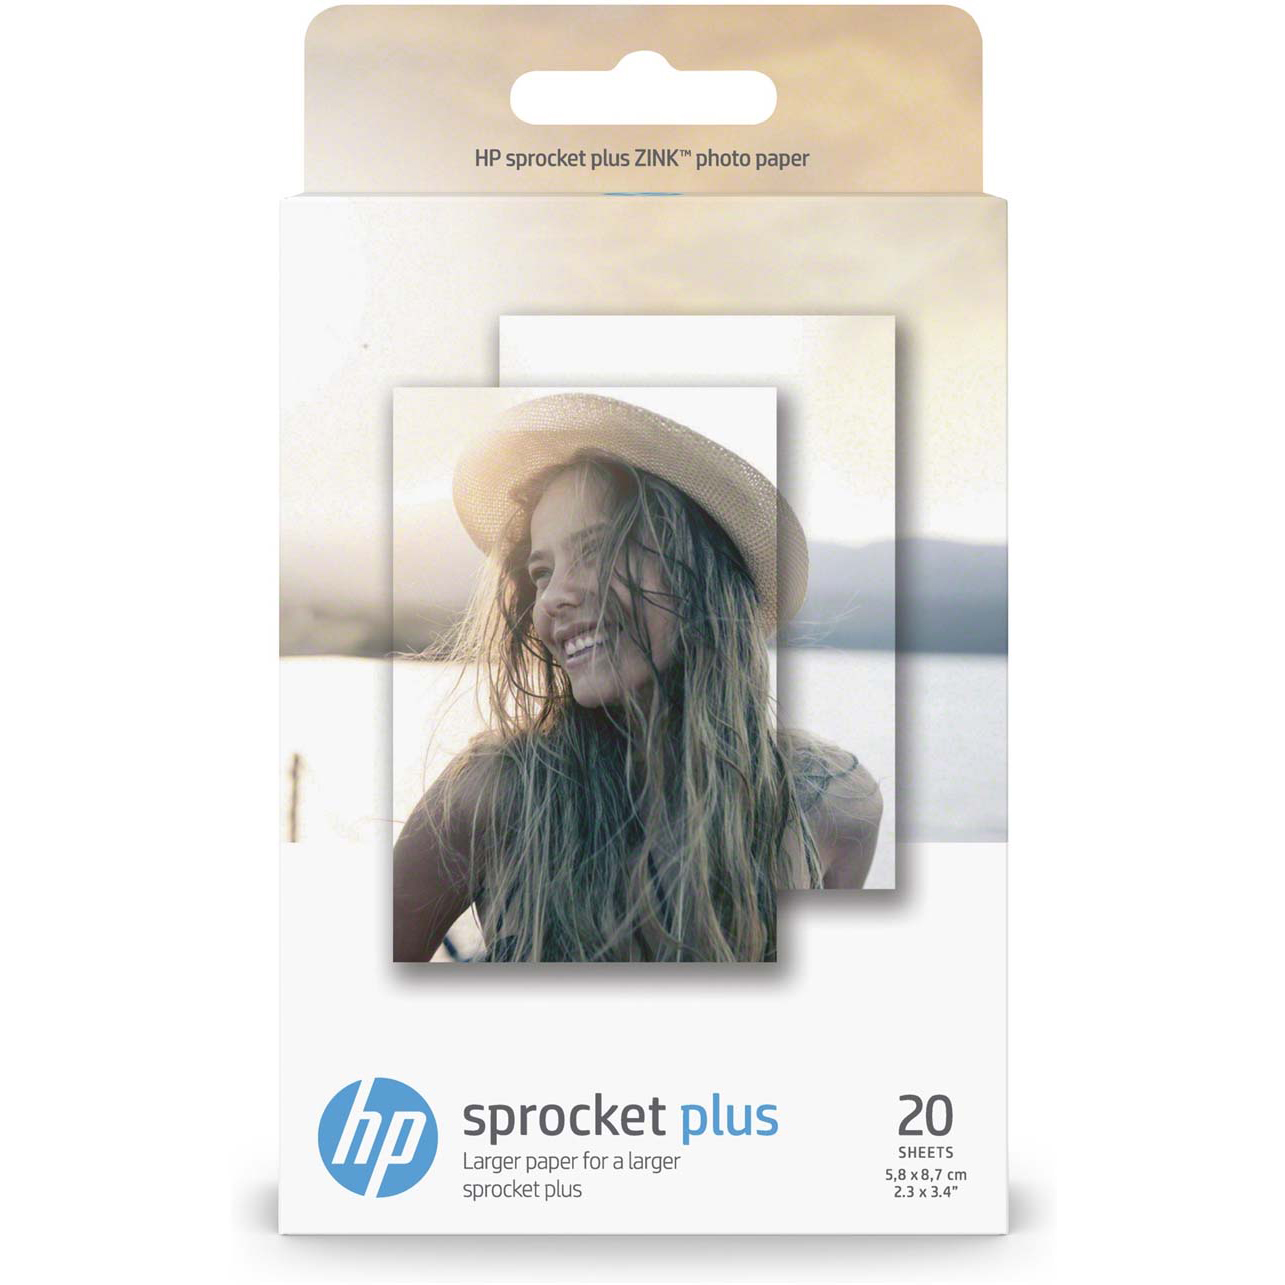 Original HP ZINK Sticky-Backed 5.8 x 8.7cm / 2.3 x 3.4inch Photo Paper - 20 Sheets (2LY72A)